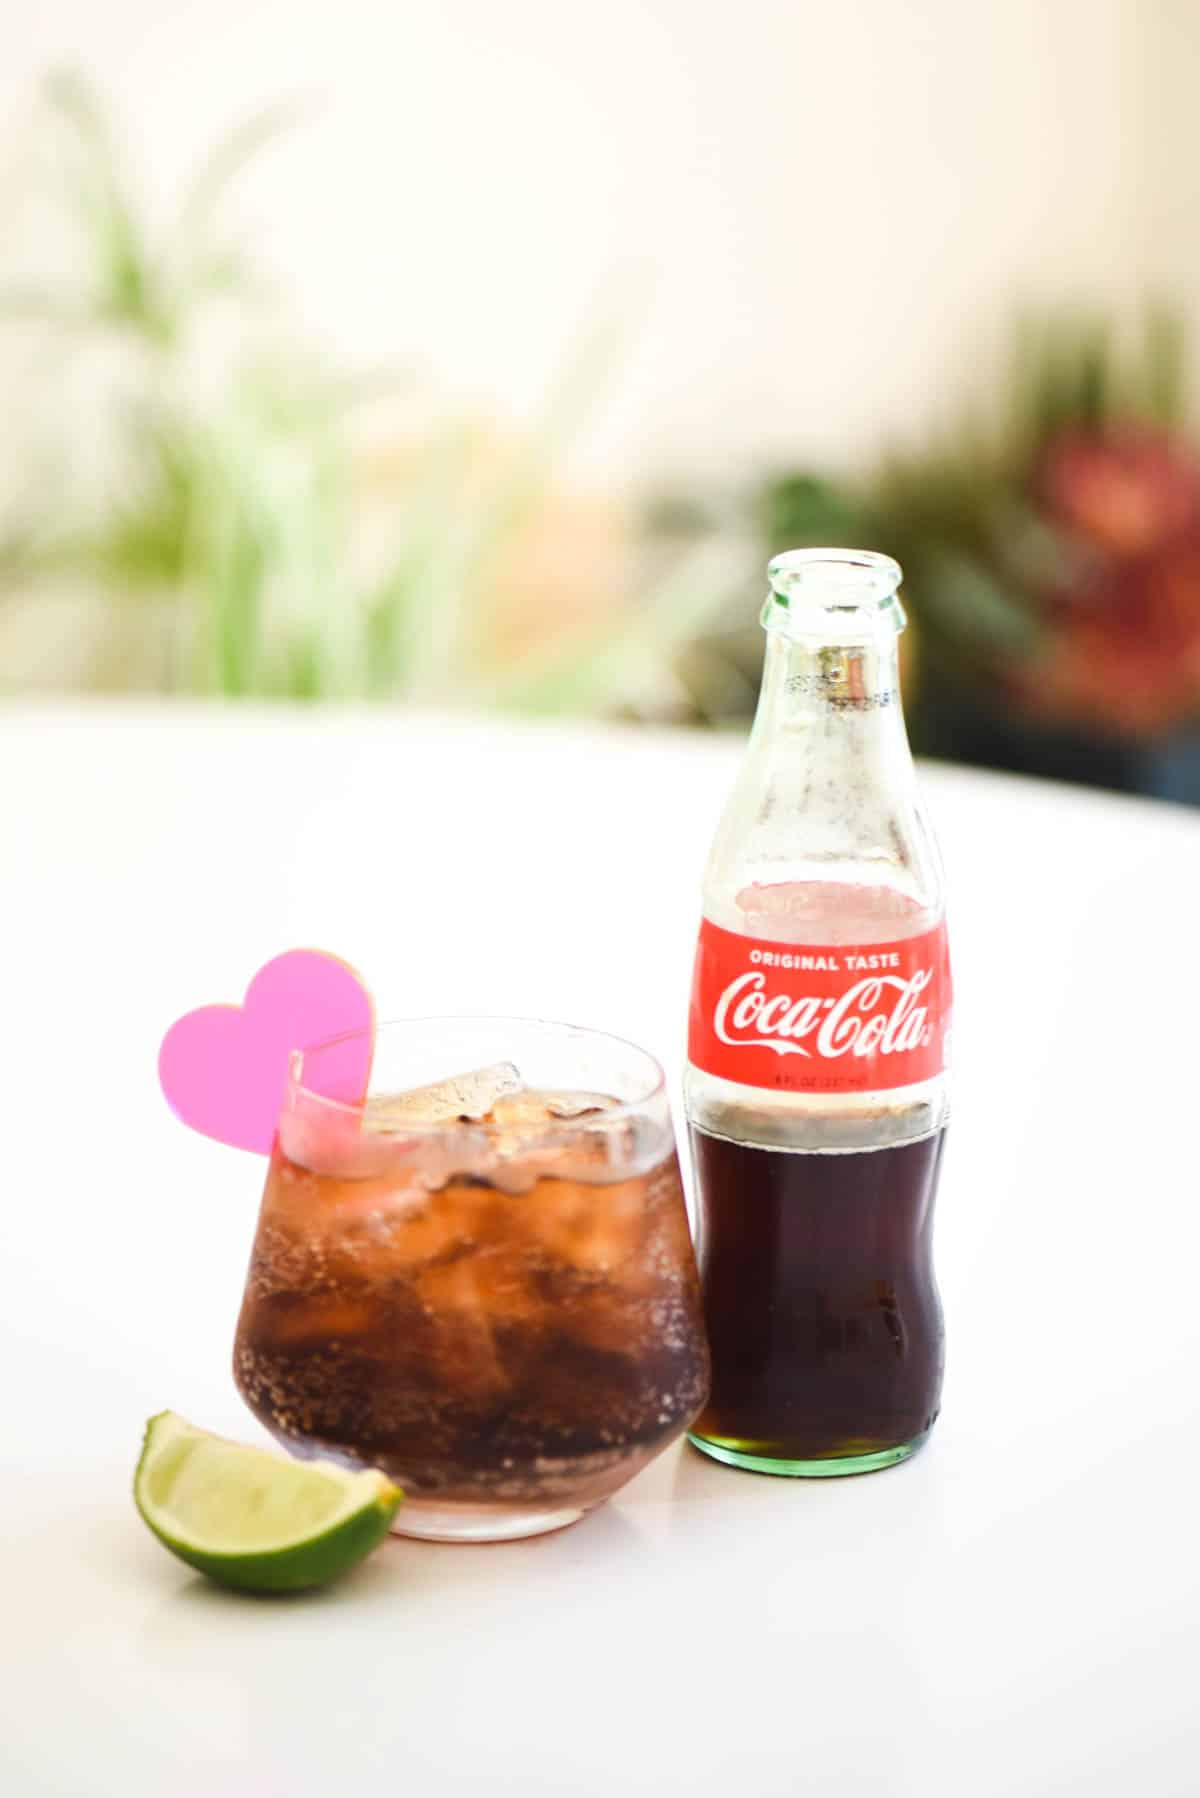 A glass of Tequila and Coke on a white table top with Coke bottle and slice of lime.